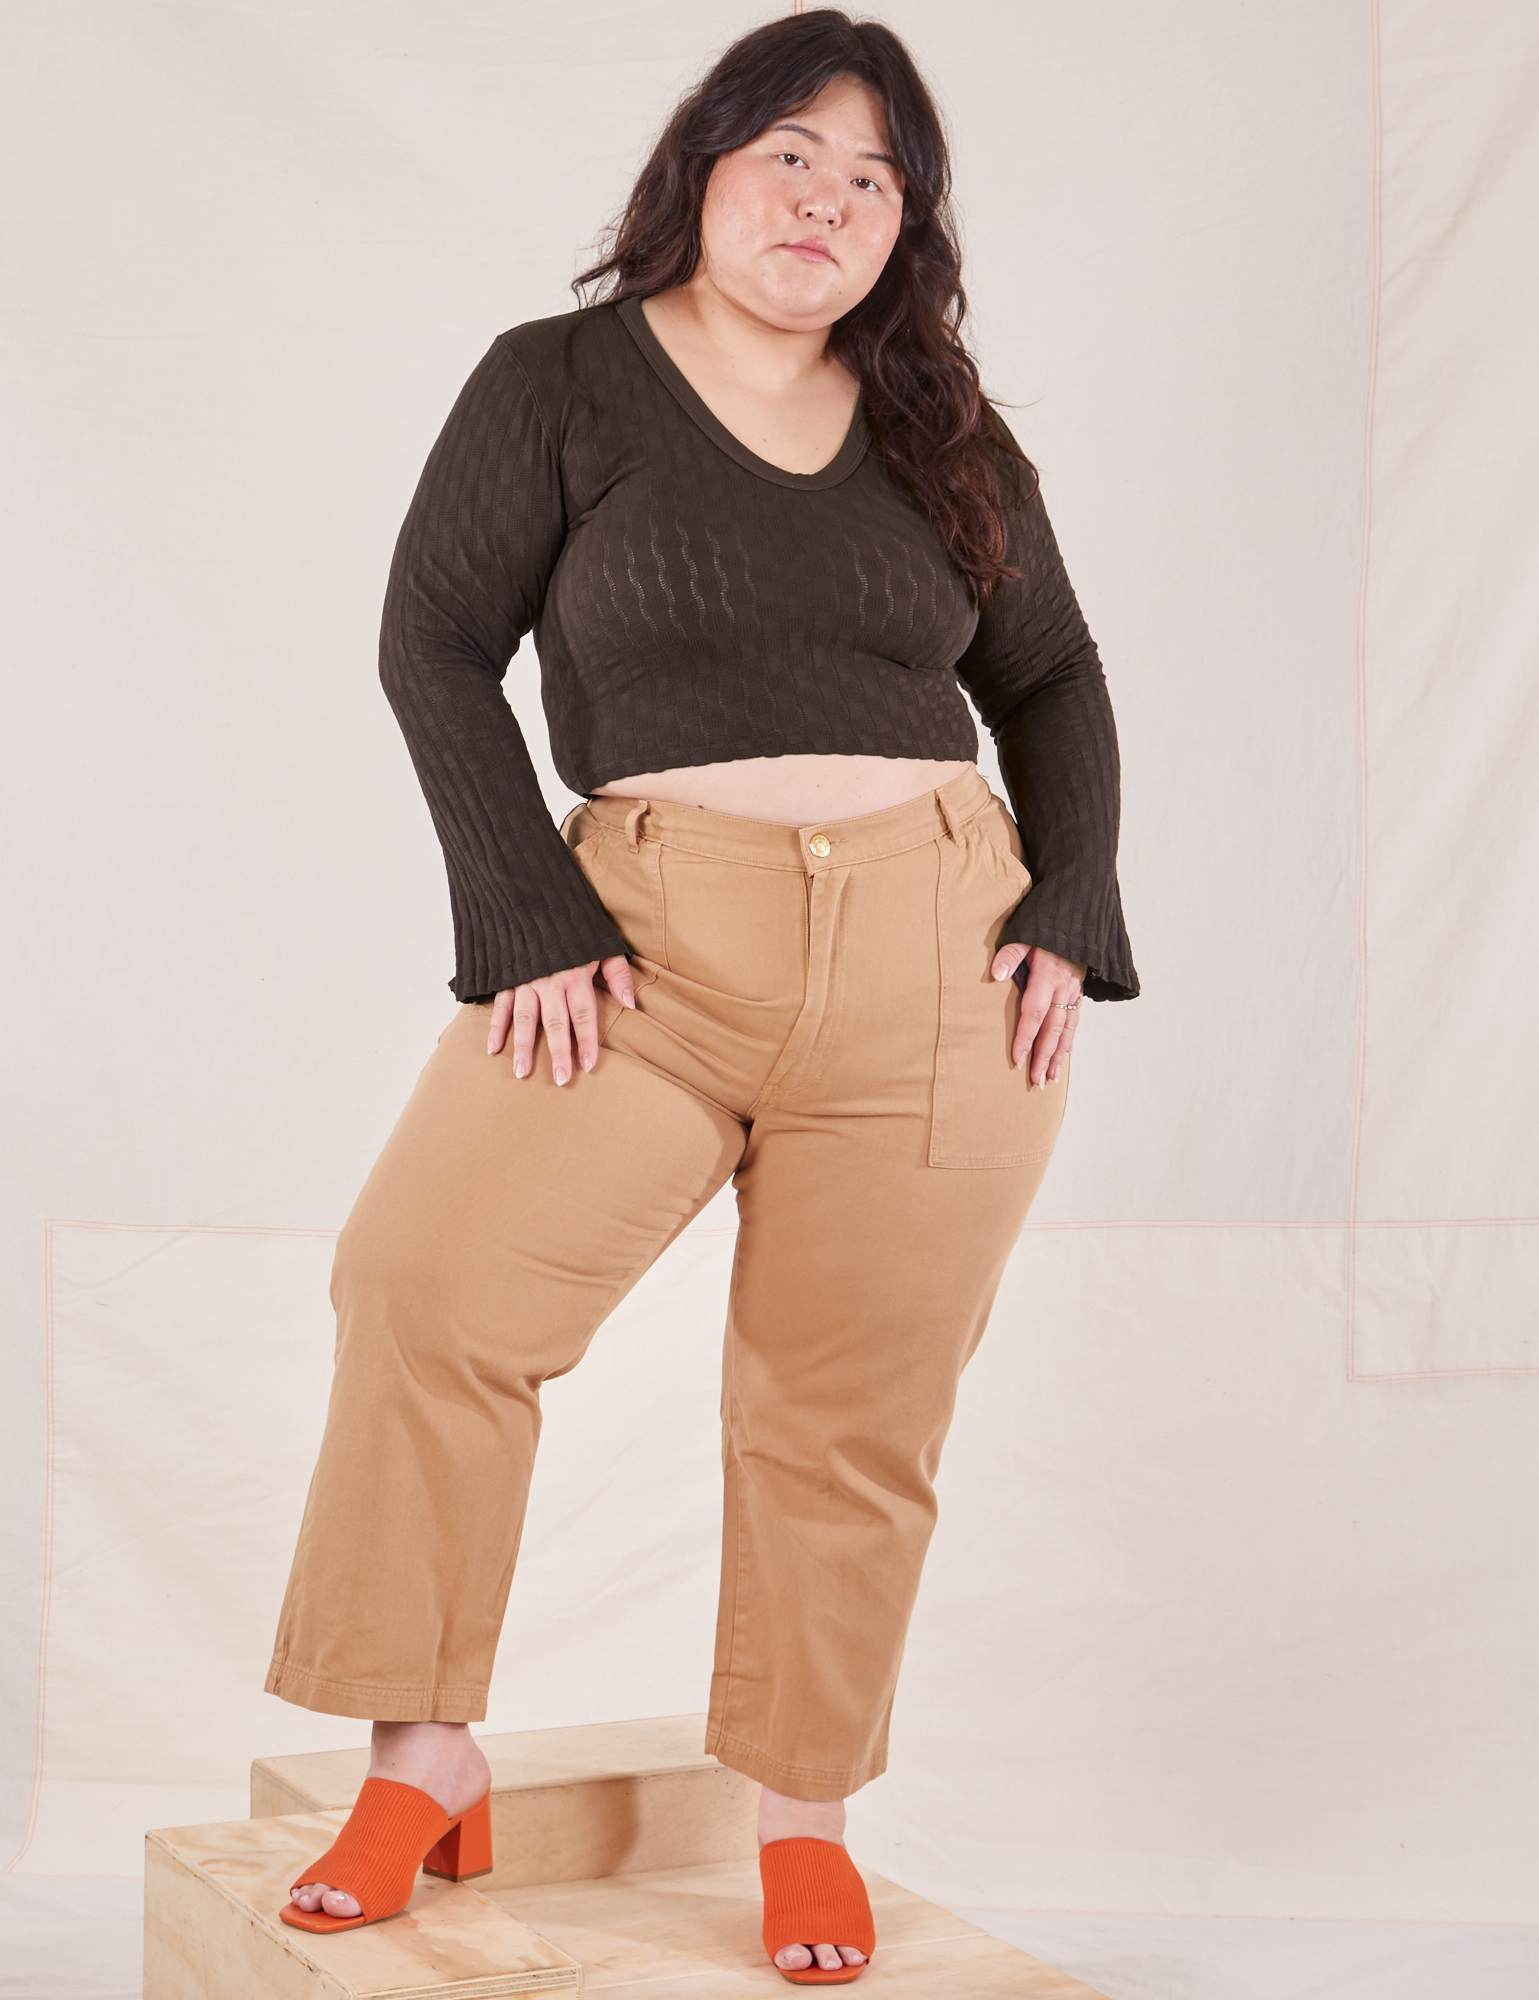 Ashley is wearing Bell Sleeve Top in Espresso Brown and tan Work Pants